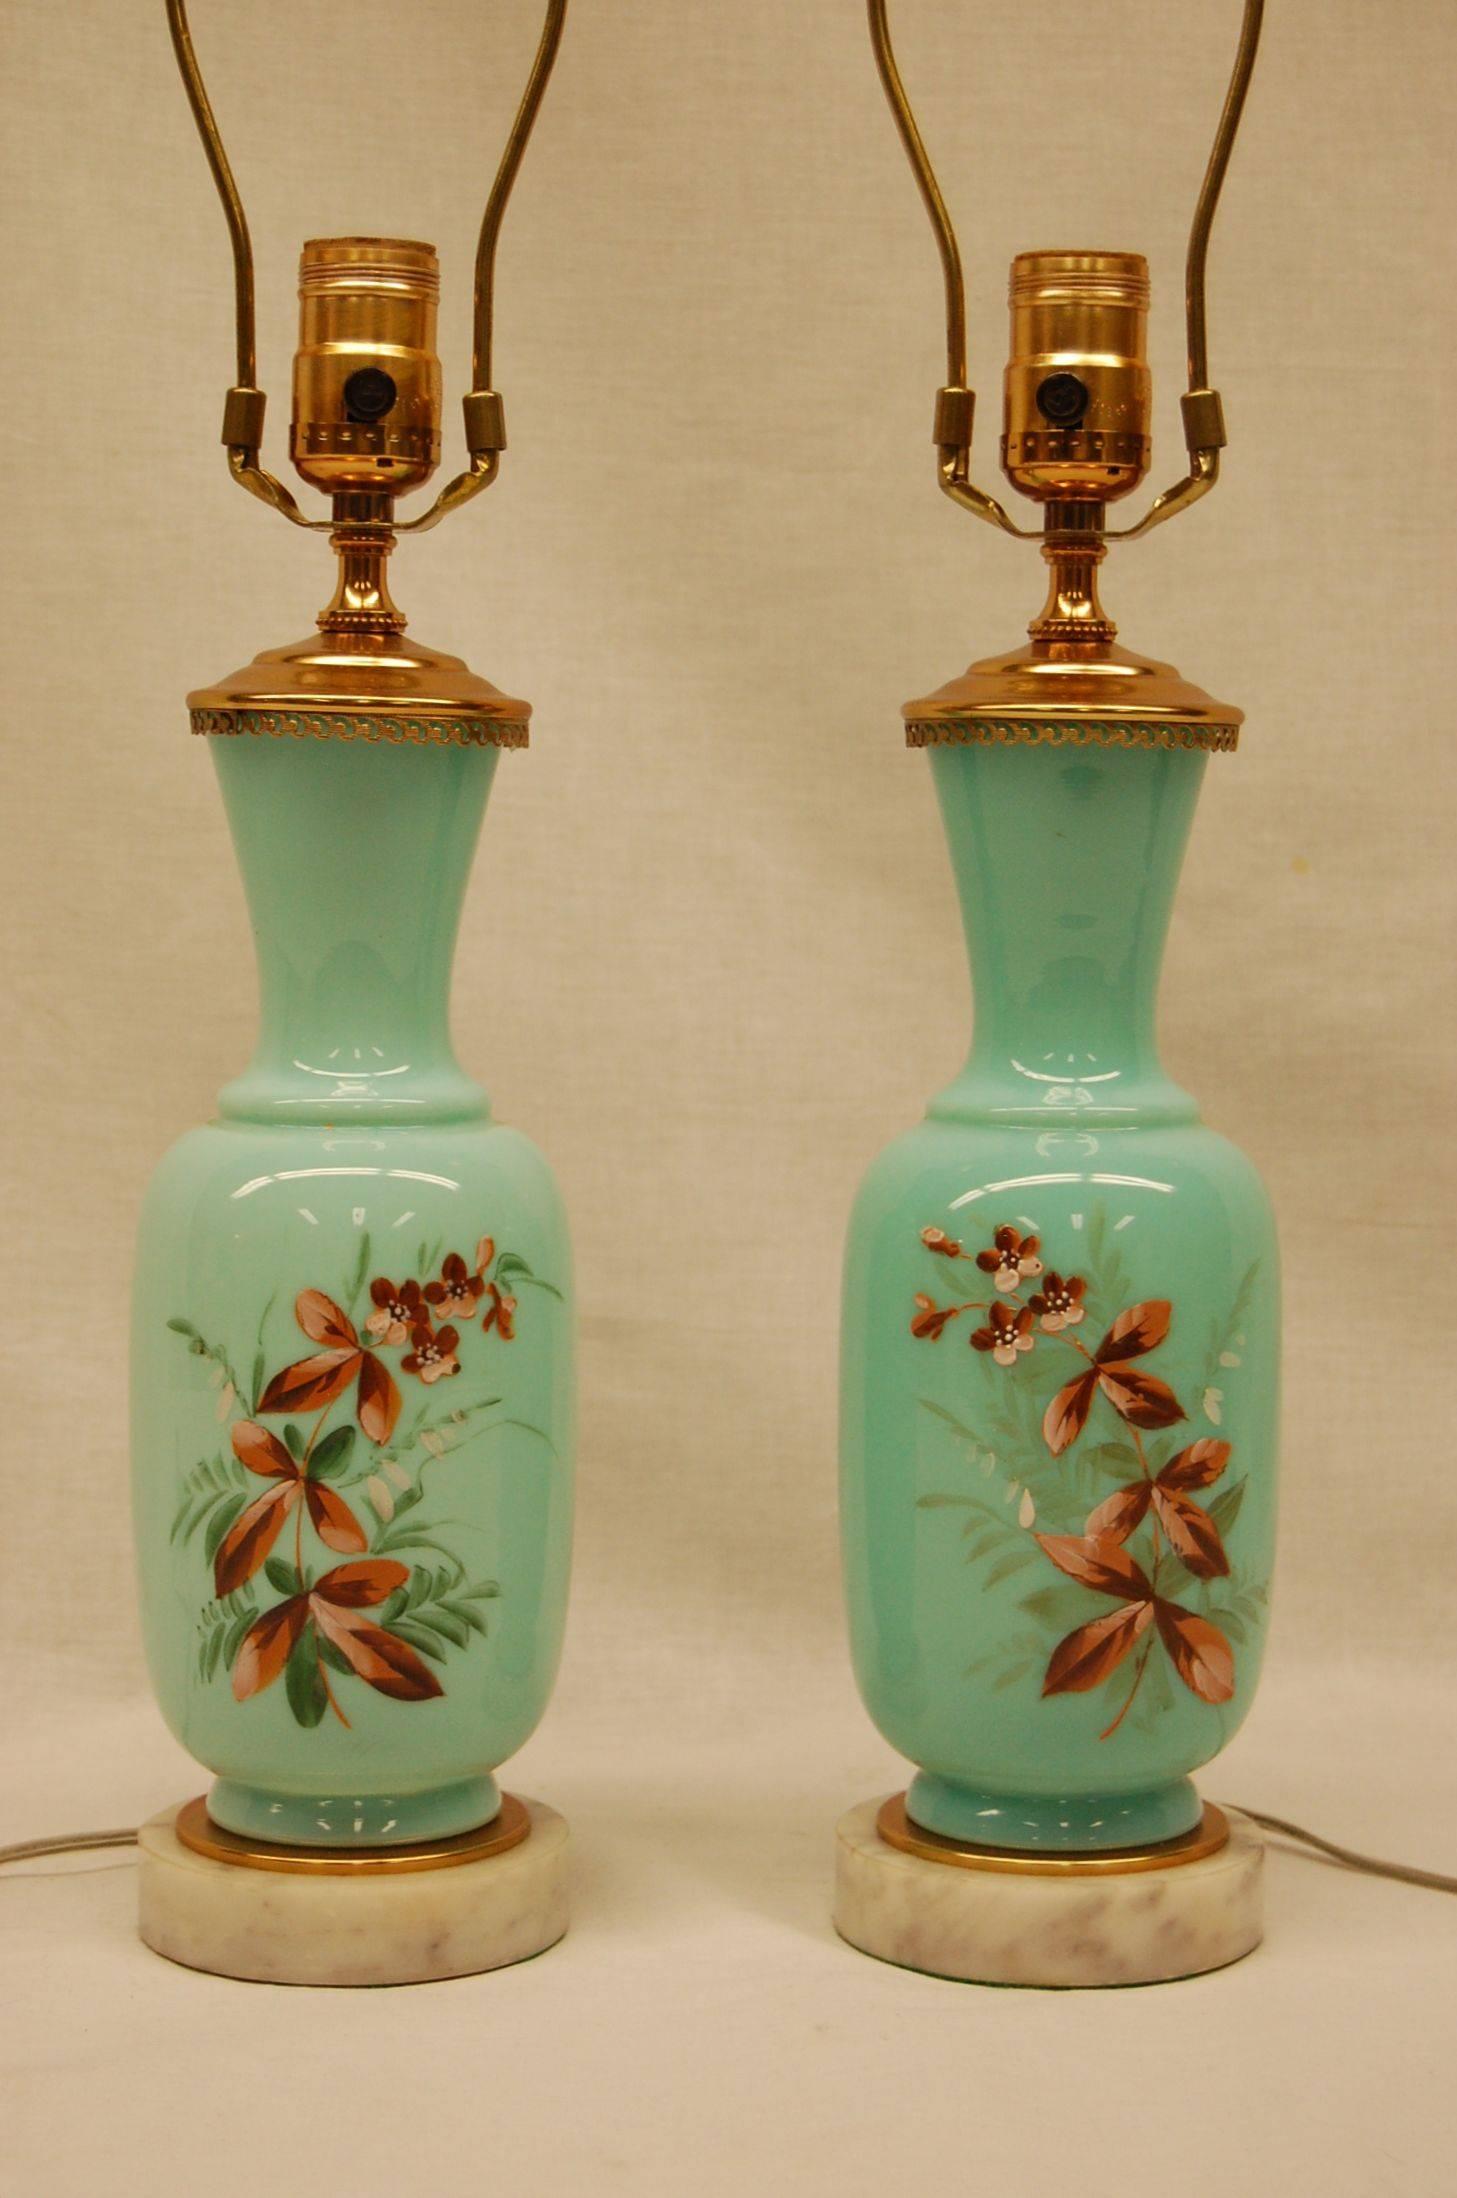 Pretty dressing table lamps in a light mint green color with hand-painted floral scenes on white marble and brass bases. Perfect mint condition. It is 11 1/2